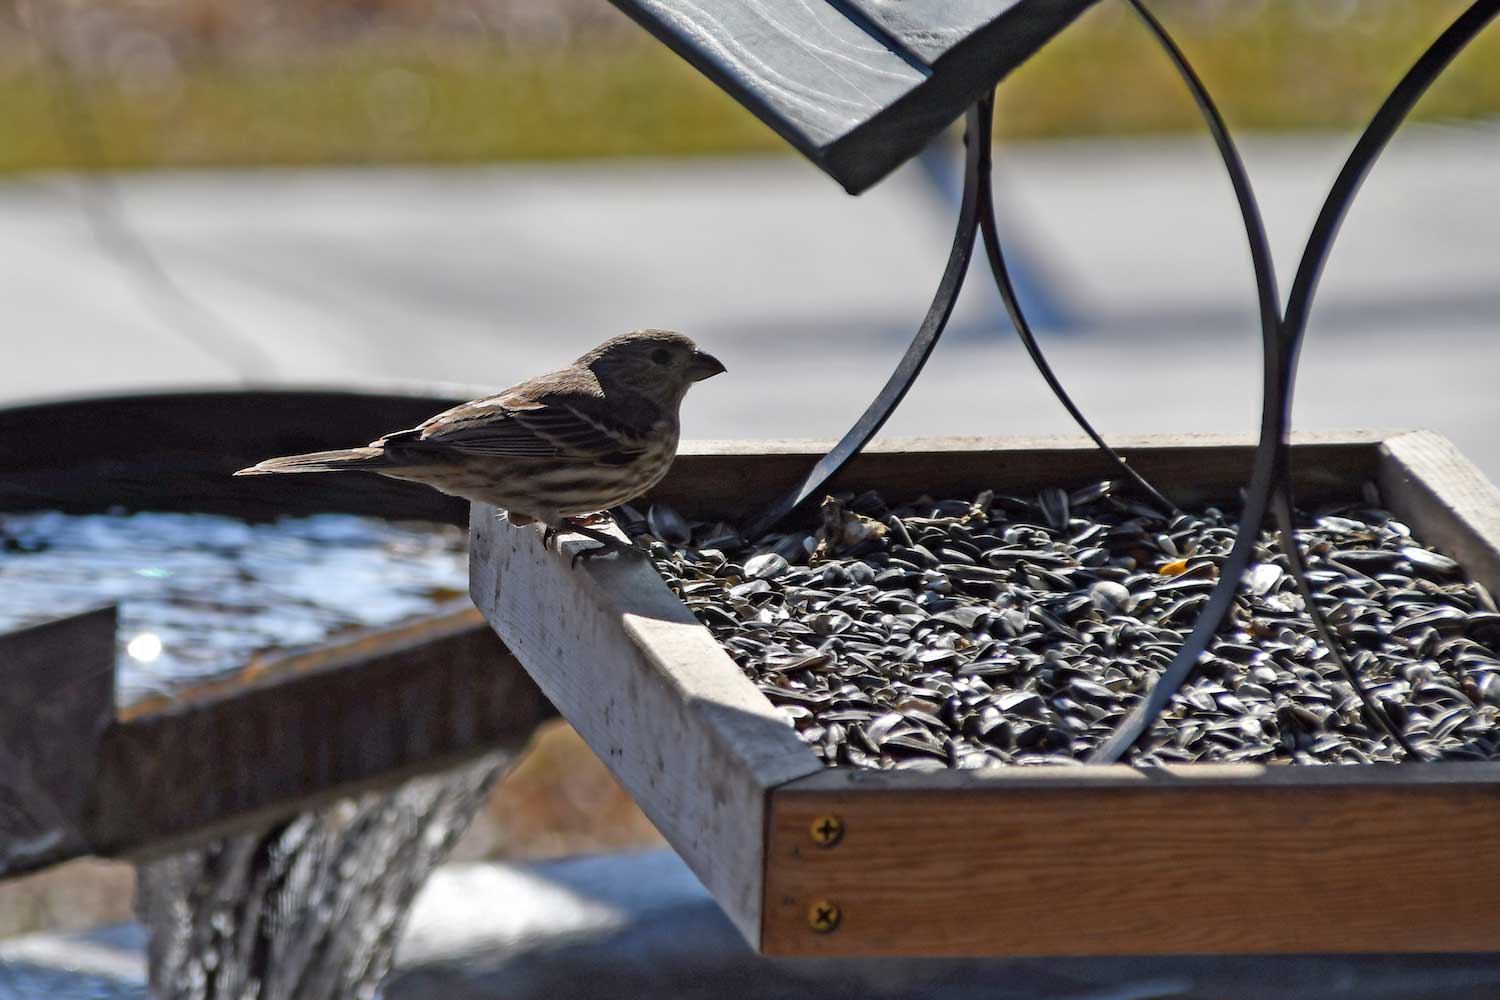 A pine siskin perched on the ledge of a tray bird feeder.